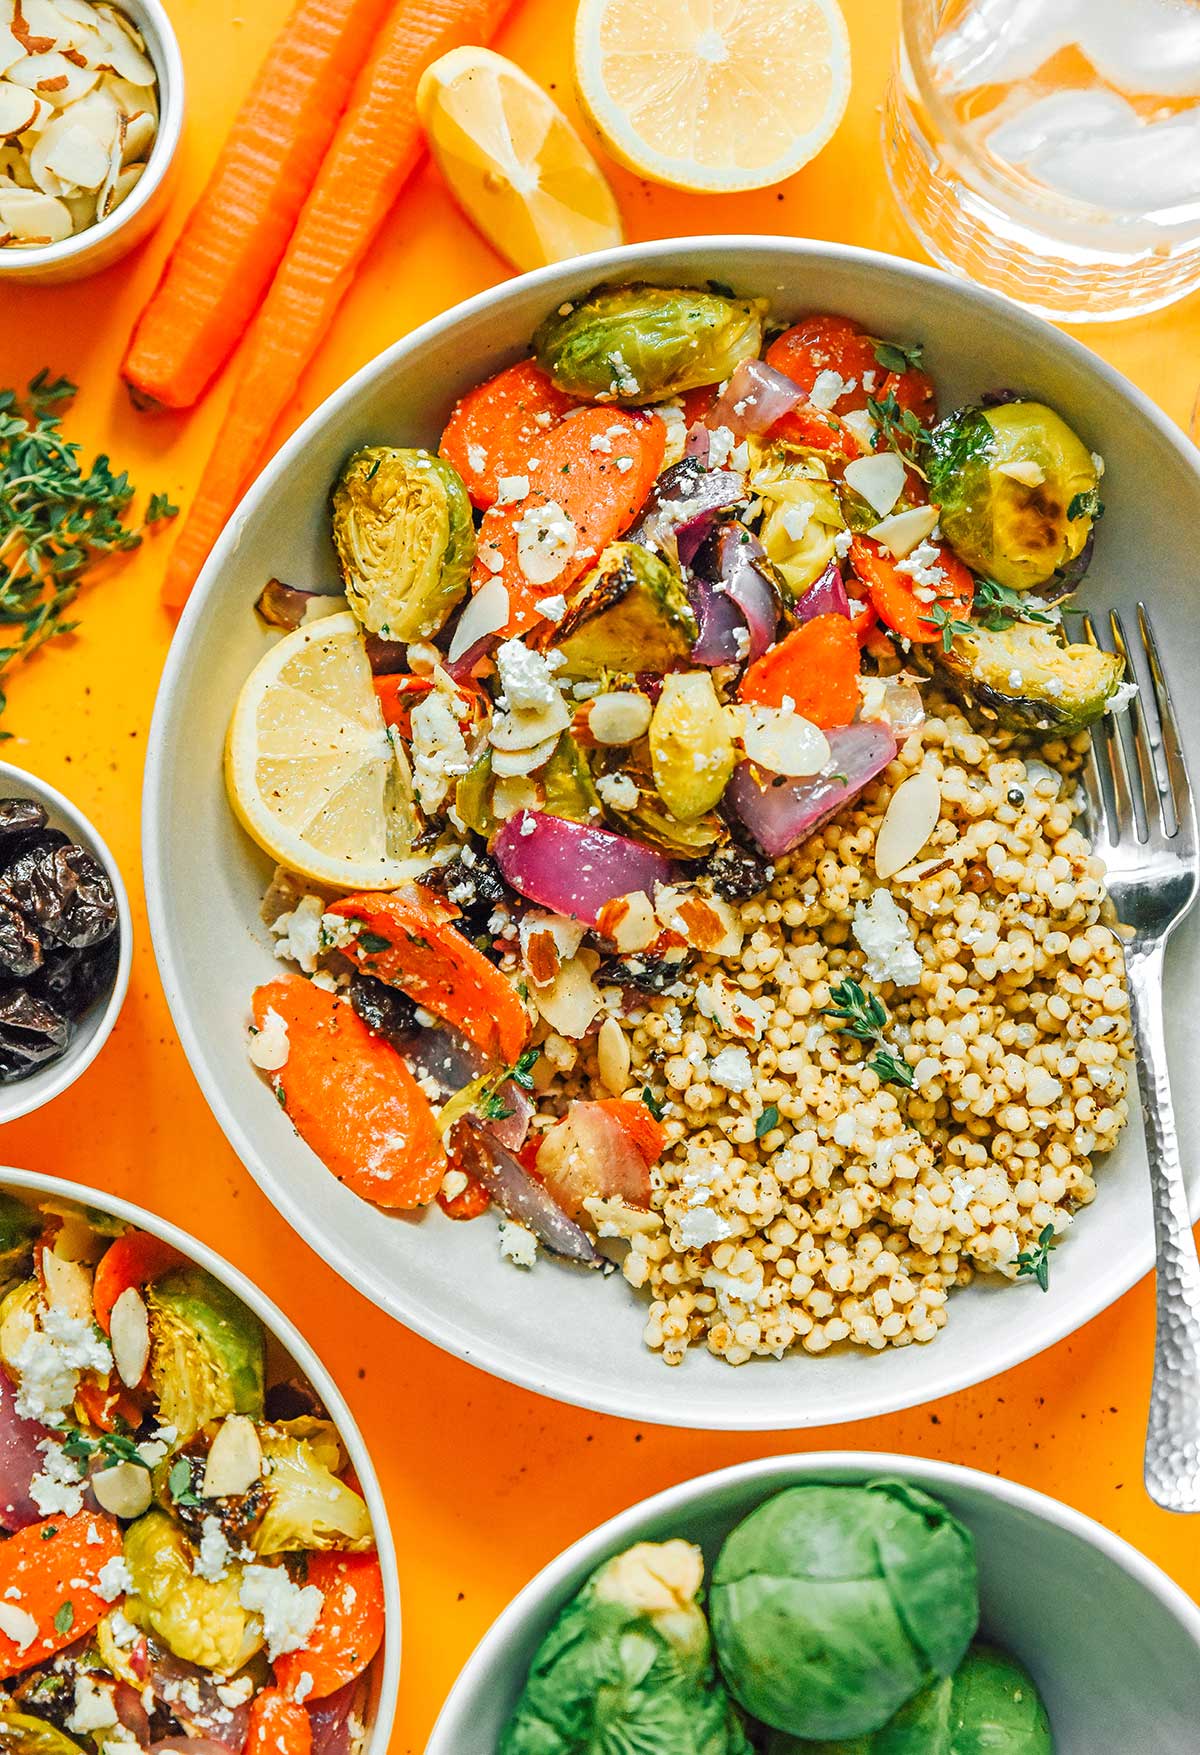 A roasted vegetable grain bowl filled with seitan, red onion, Brussels sprouts, carrots, lemon slices, feta cheese, and more